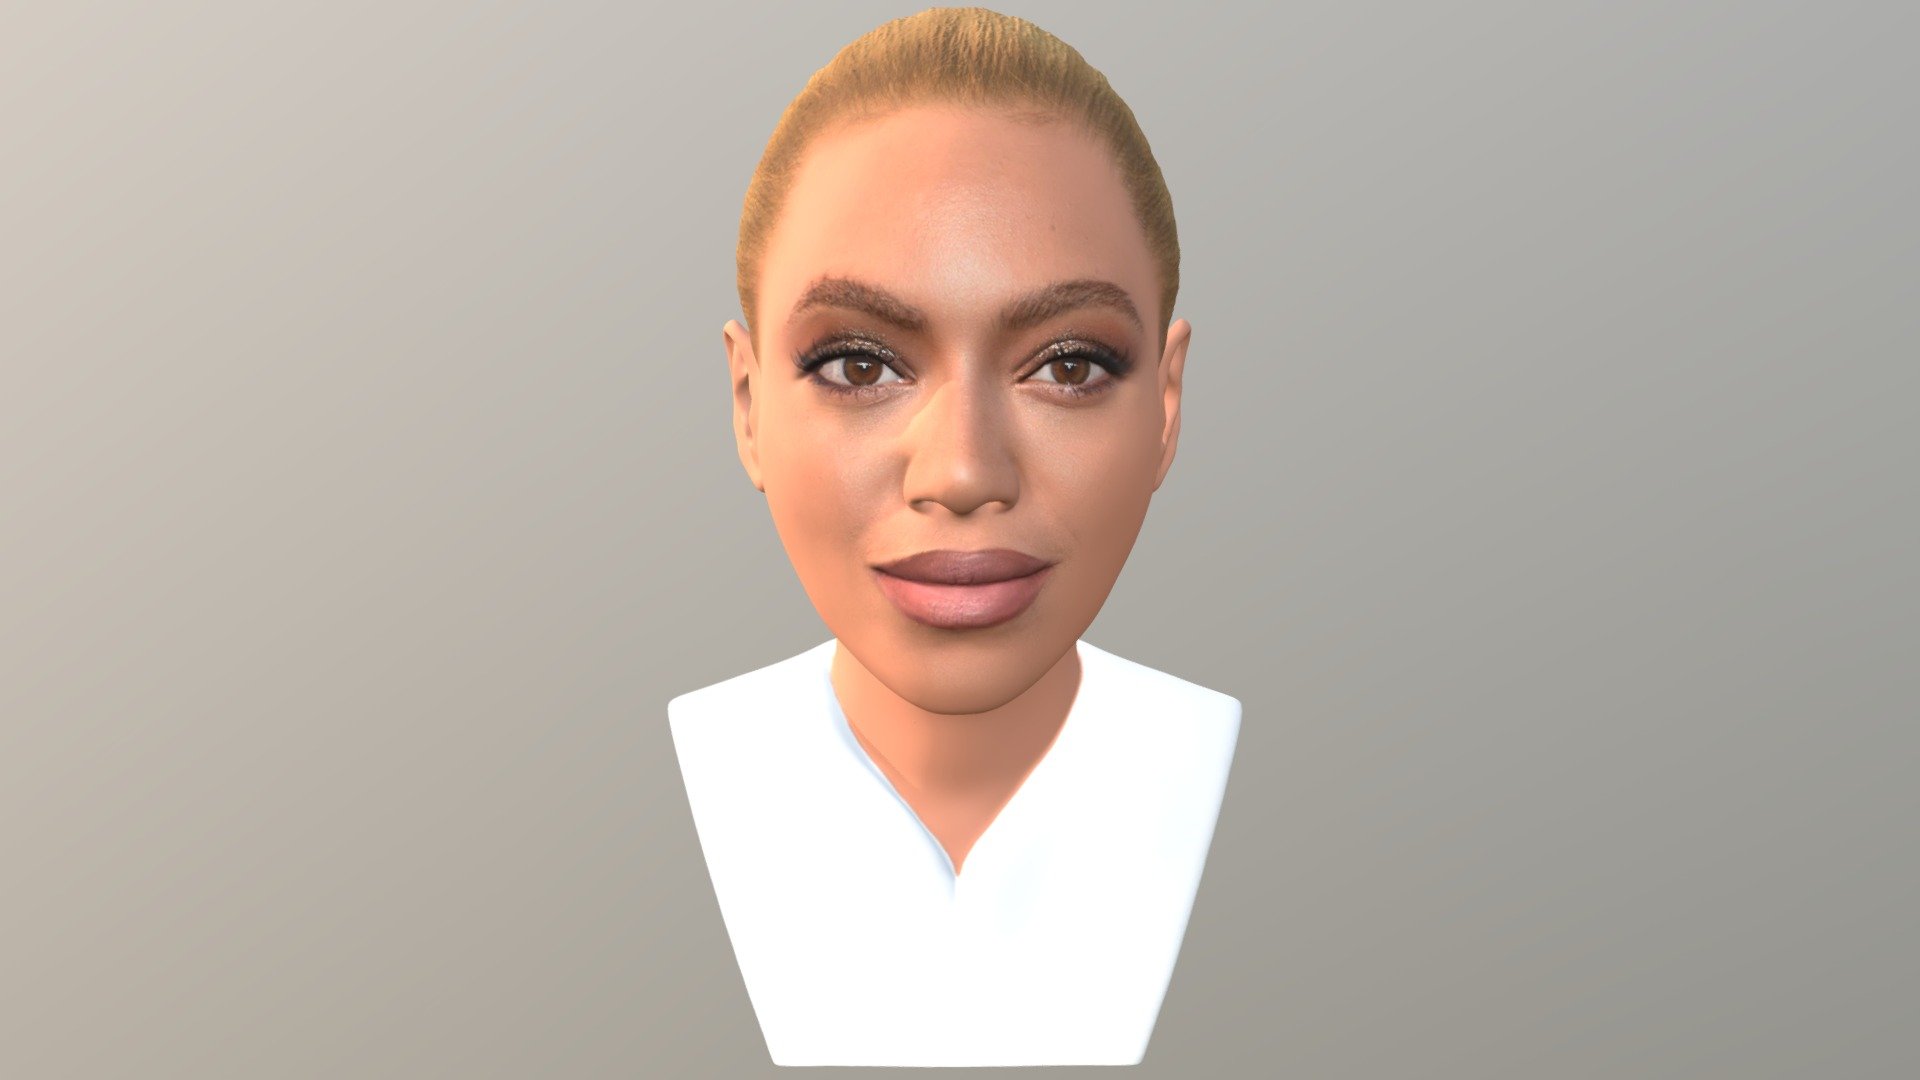 Here is Beyonce Knowles bust 3D model ready for full color 3D printing. The model current size is 5 cm height, but you are free to scale it. Zip file contains obj with texture in png. The model was created in ZBrush, Mudbox and Photoshop.

If you have any questions please don’t hesitate to contact me. I will respond you ASAP. I encourage you to check my other celebrity 3D models 3d model